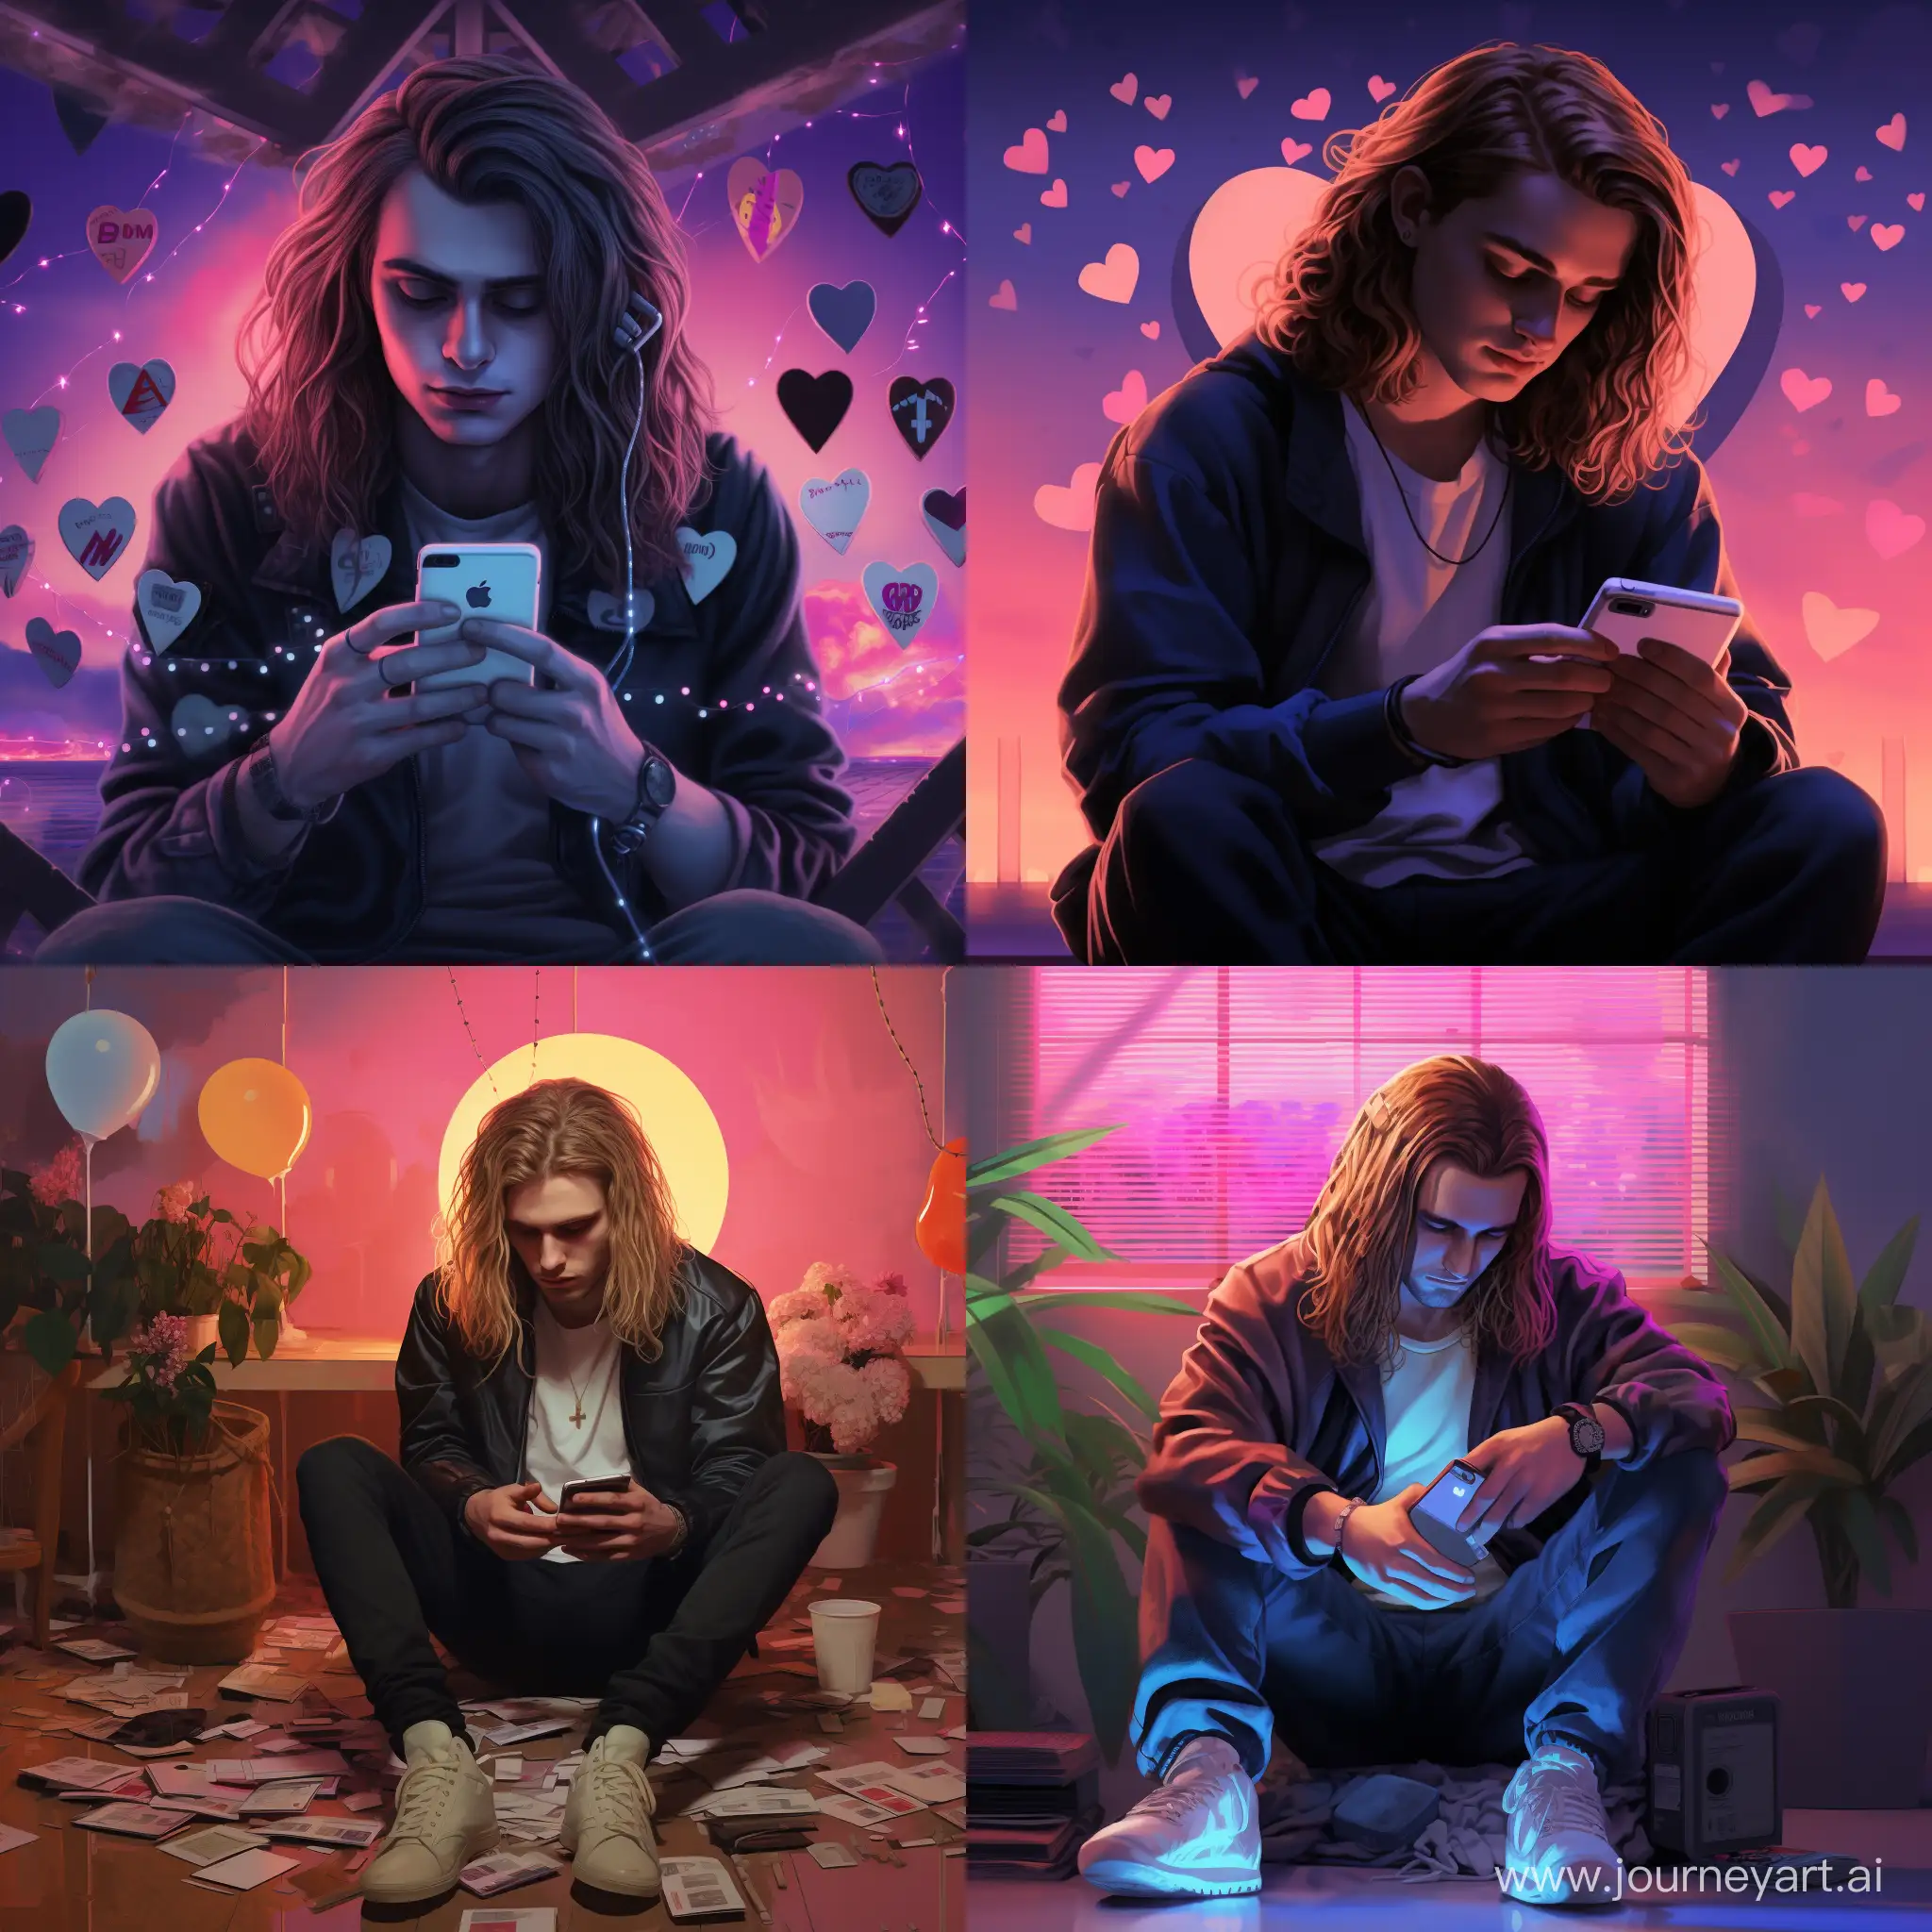 cover art for the track titled "love in messenger", A sad white-skinned guy with long hair is suffering and sad with a phone in his hands, cyberpank style, 3d